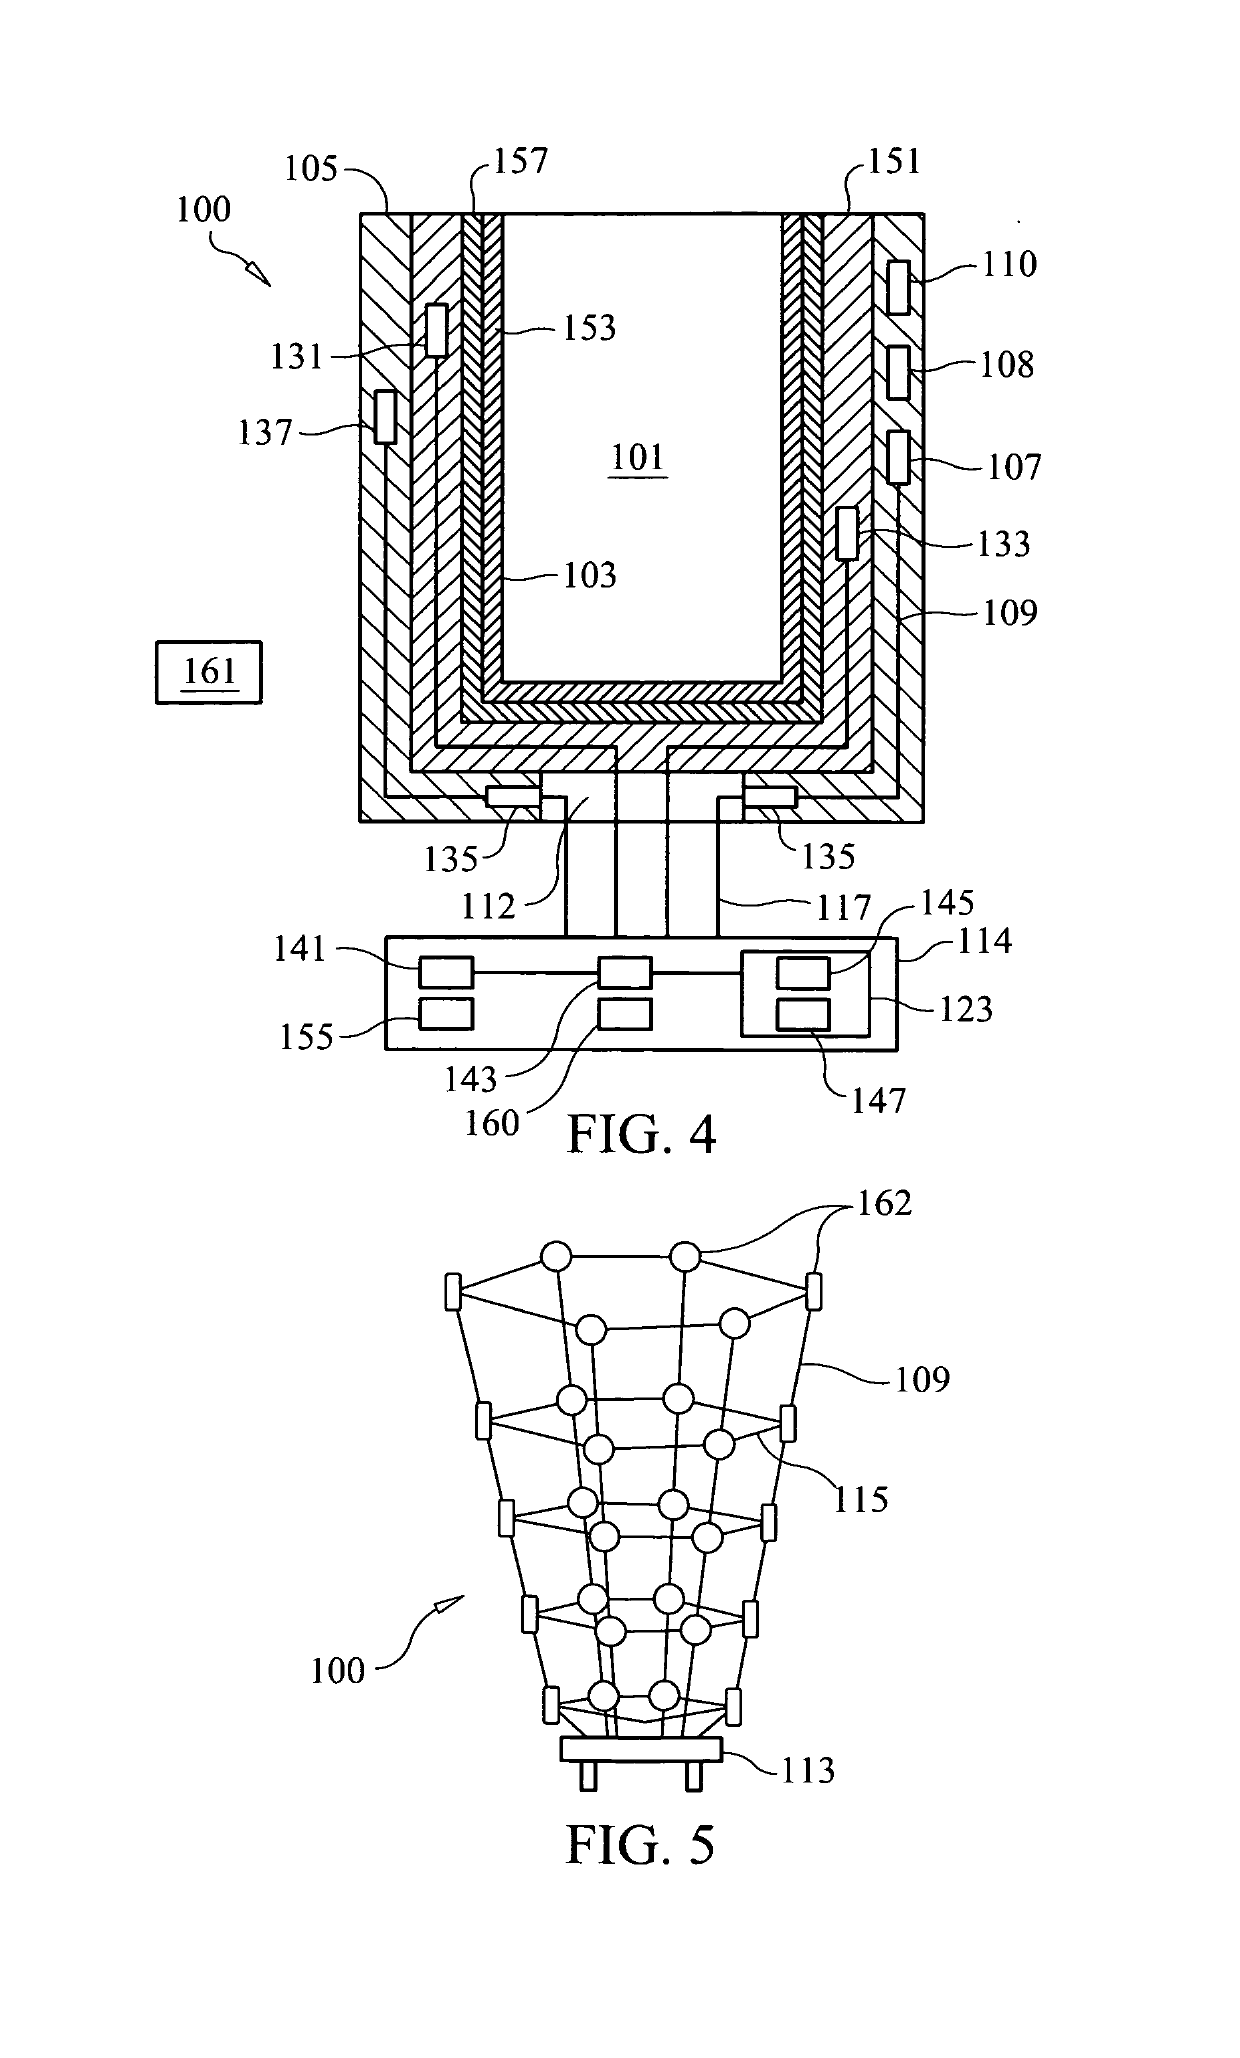 Electromagnetic suspension system for prosthetic device